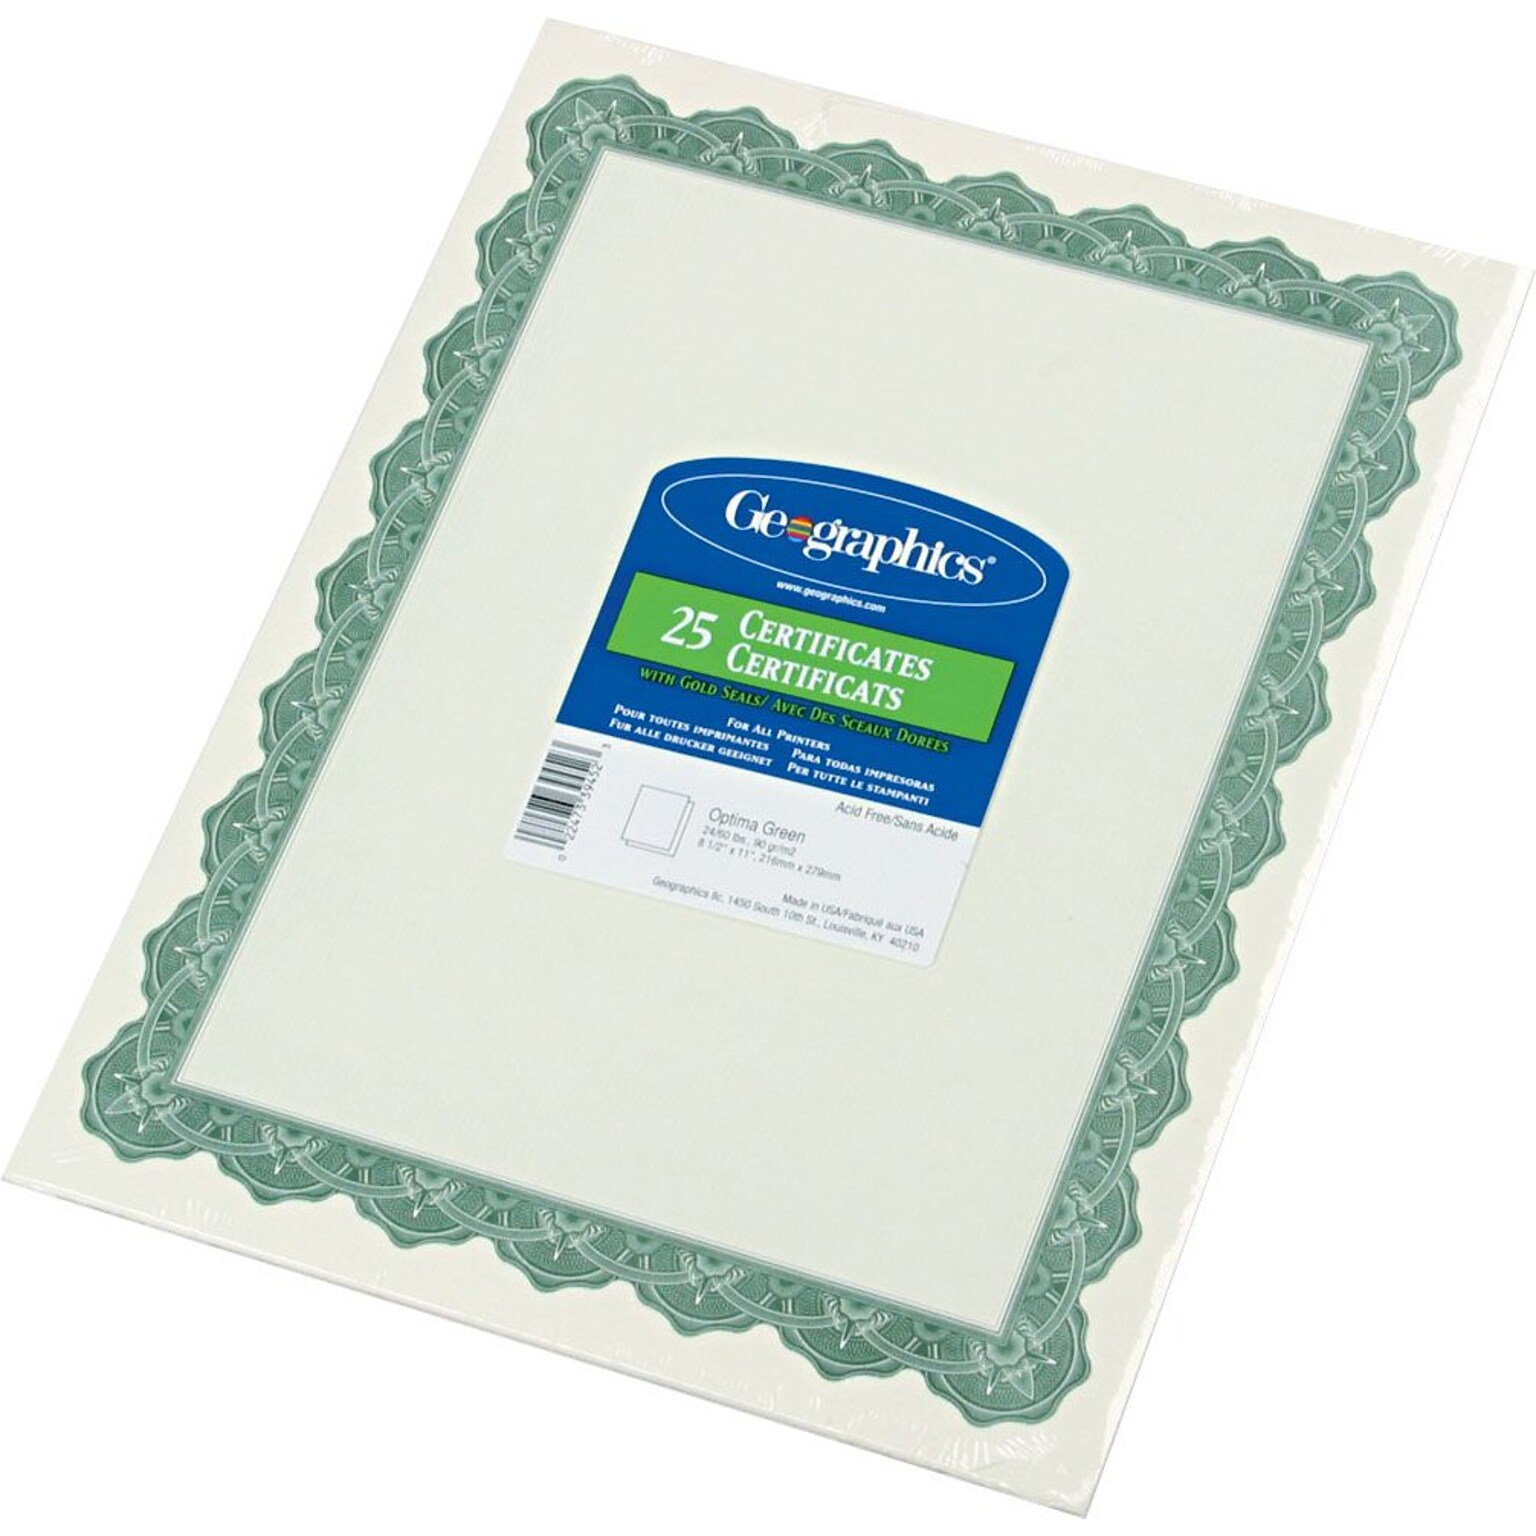 Geographics Certificates, 8.5 x 11, Green, 25/Pack (GEO39452)